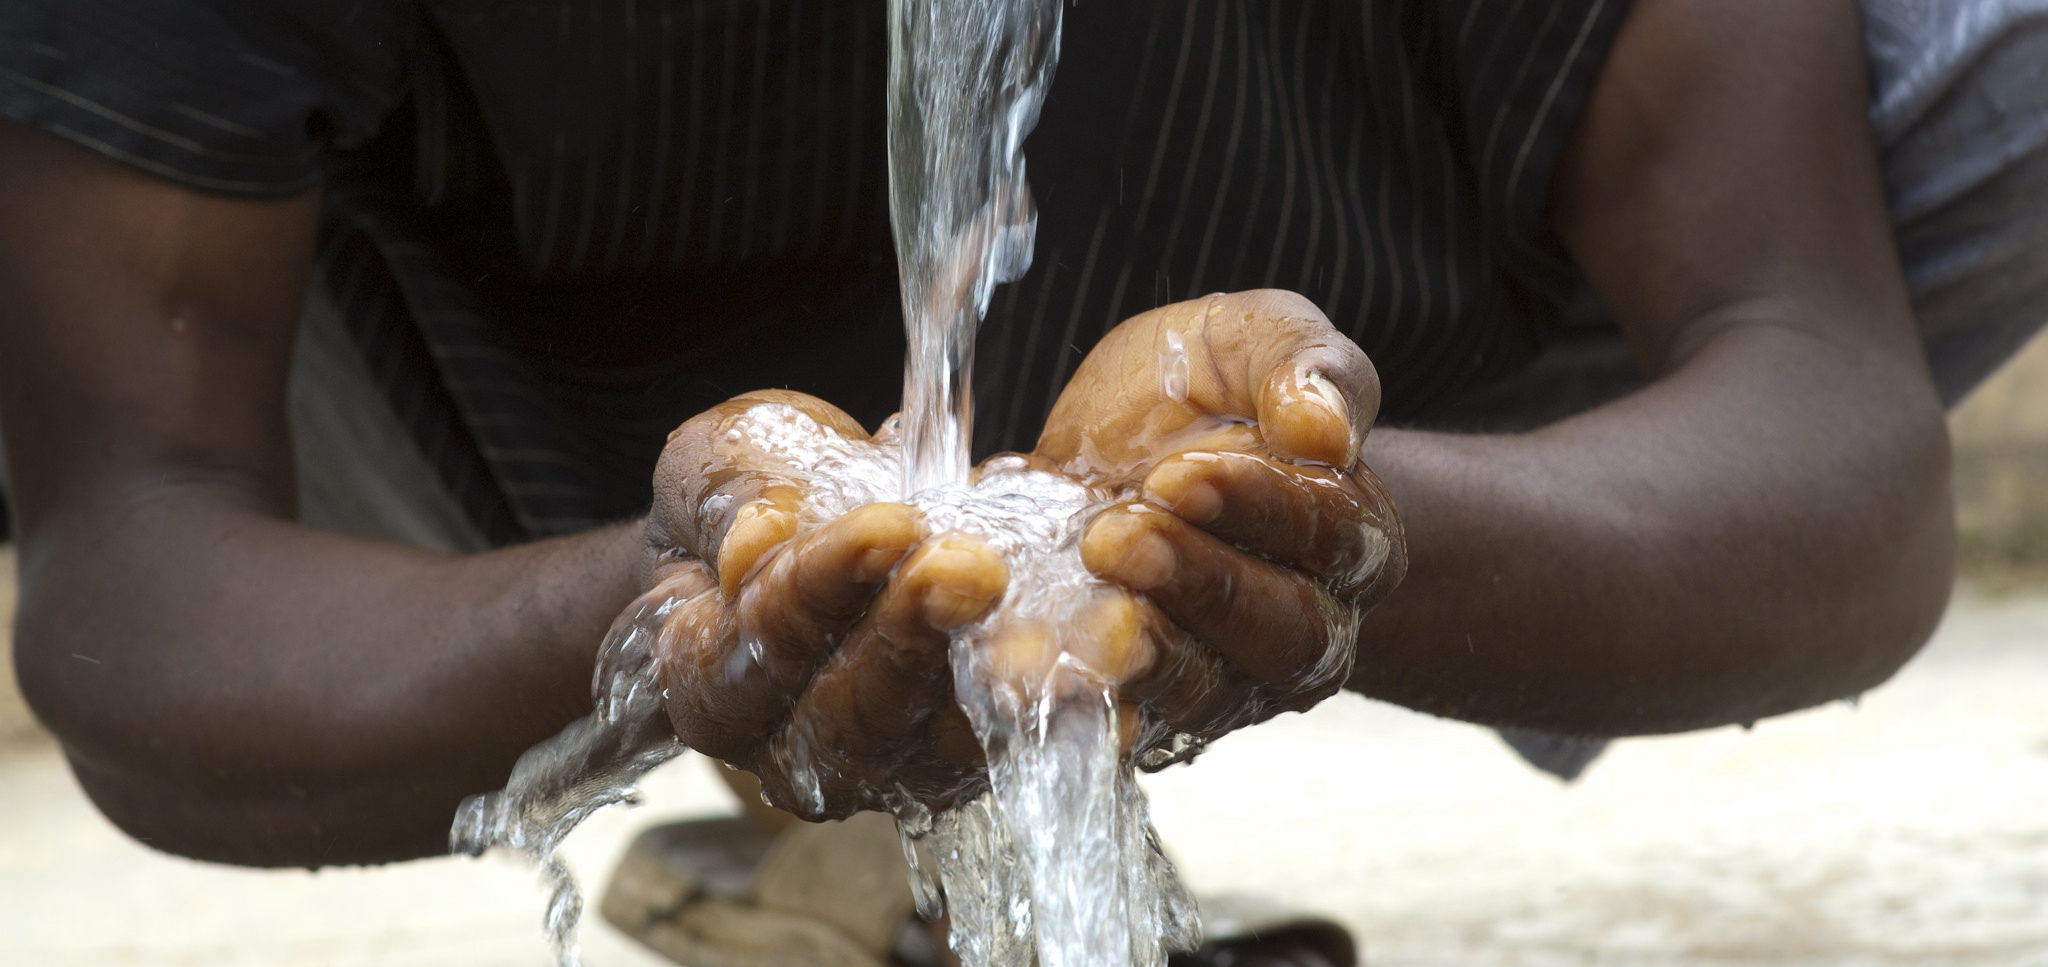 Improving water security in developing countries